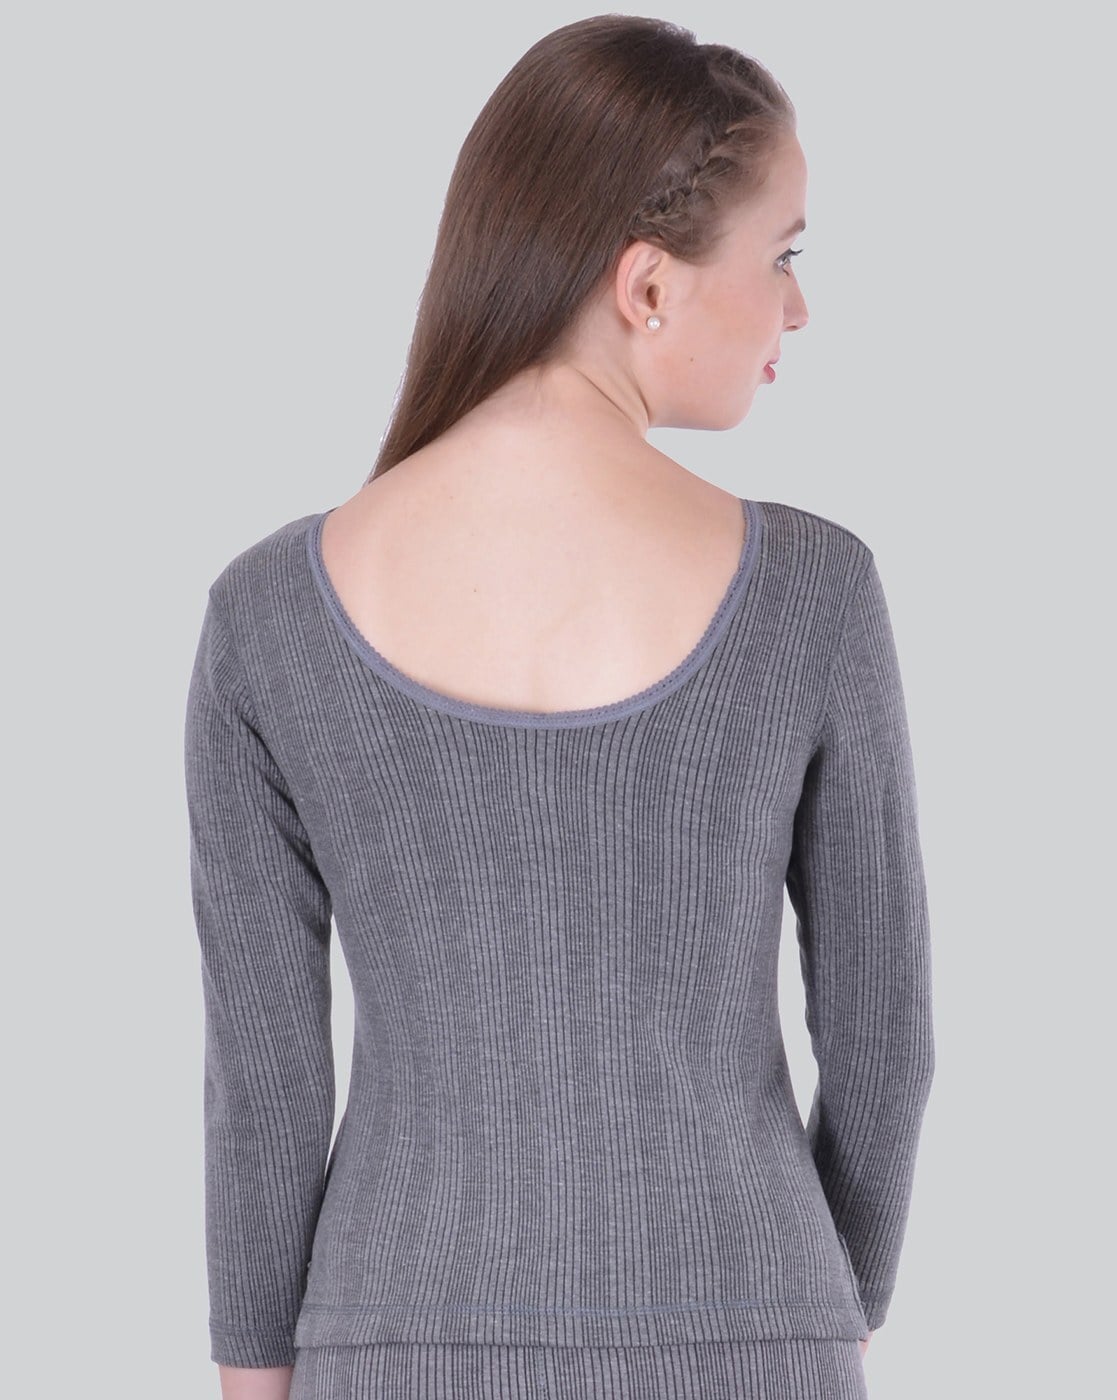 Buy Lux Inferno Women Cotton Thermal top - Grey Online at Low Prices in  India 